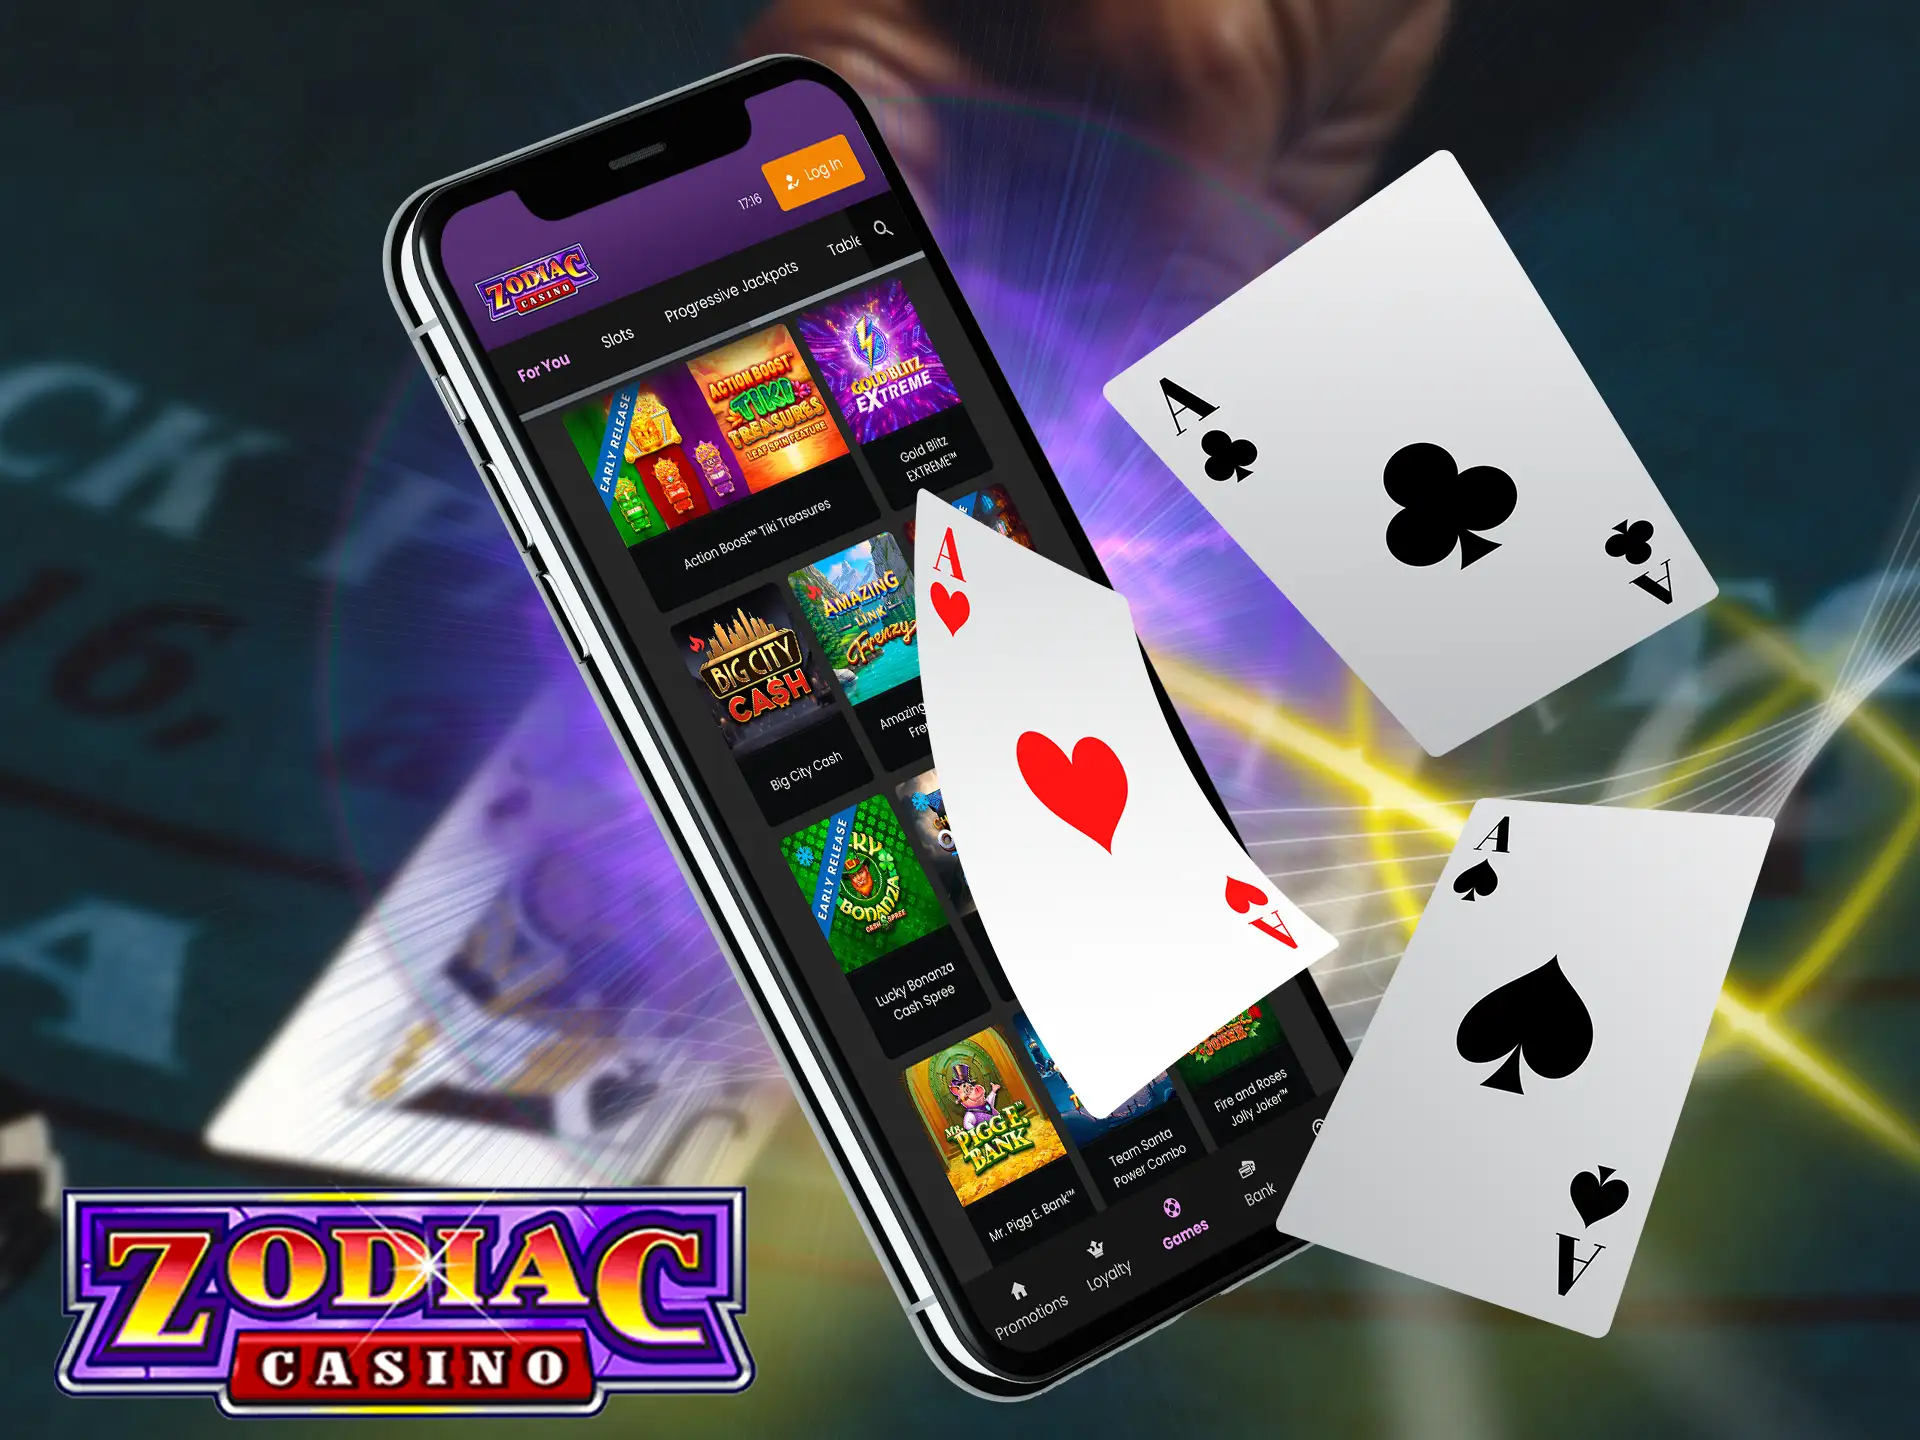 A giant jackpot awaits Zodiac Casino players, as well as many other interesting prizes.